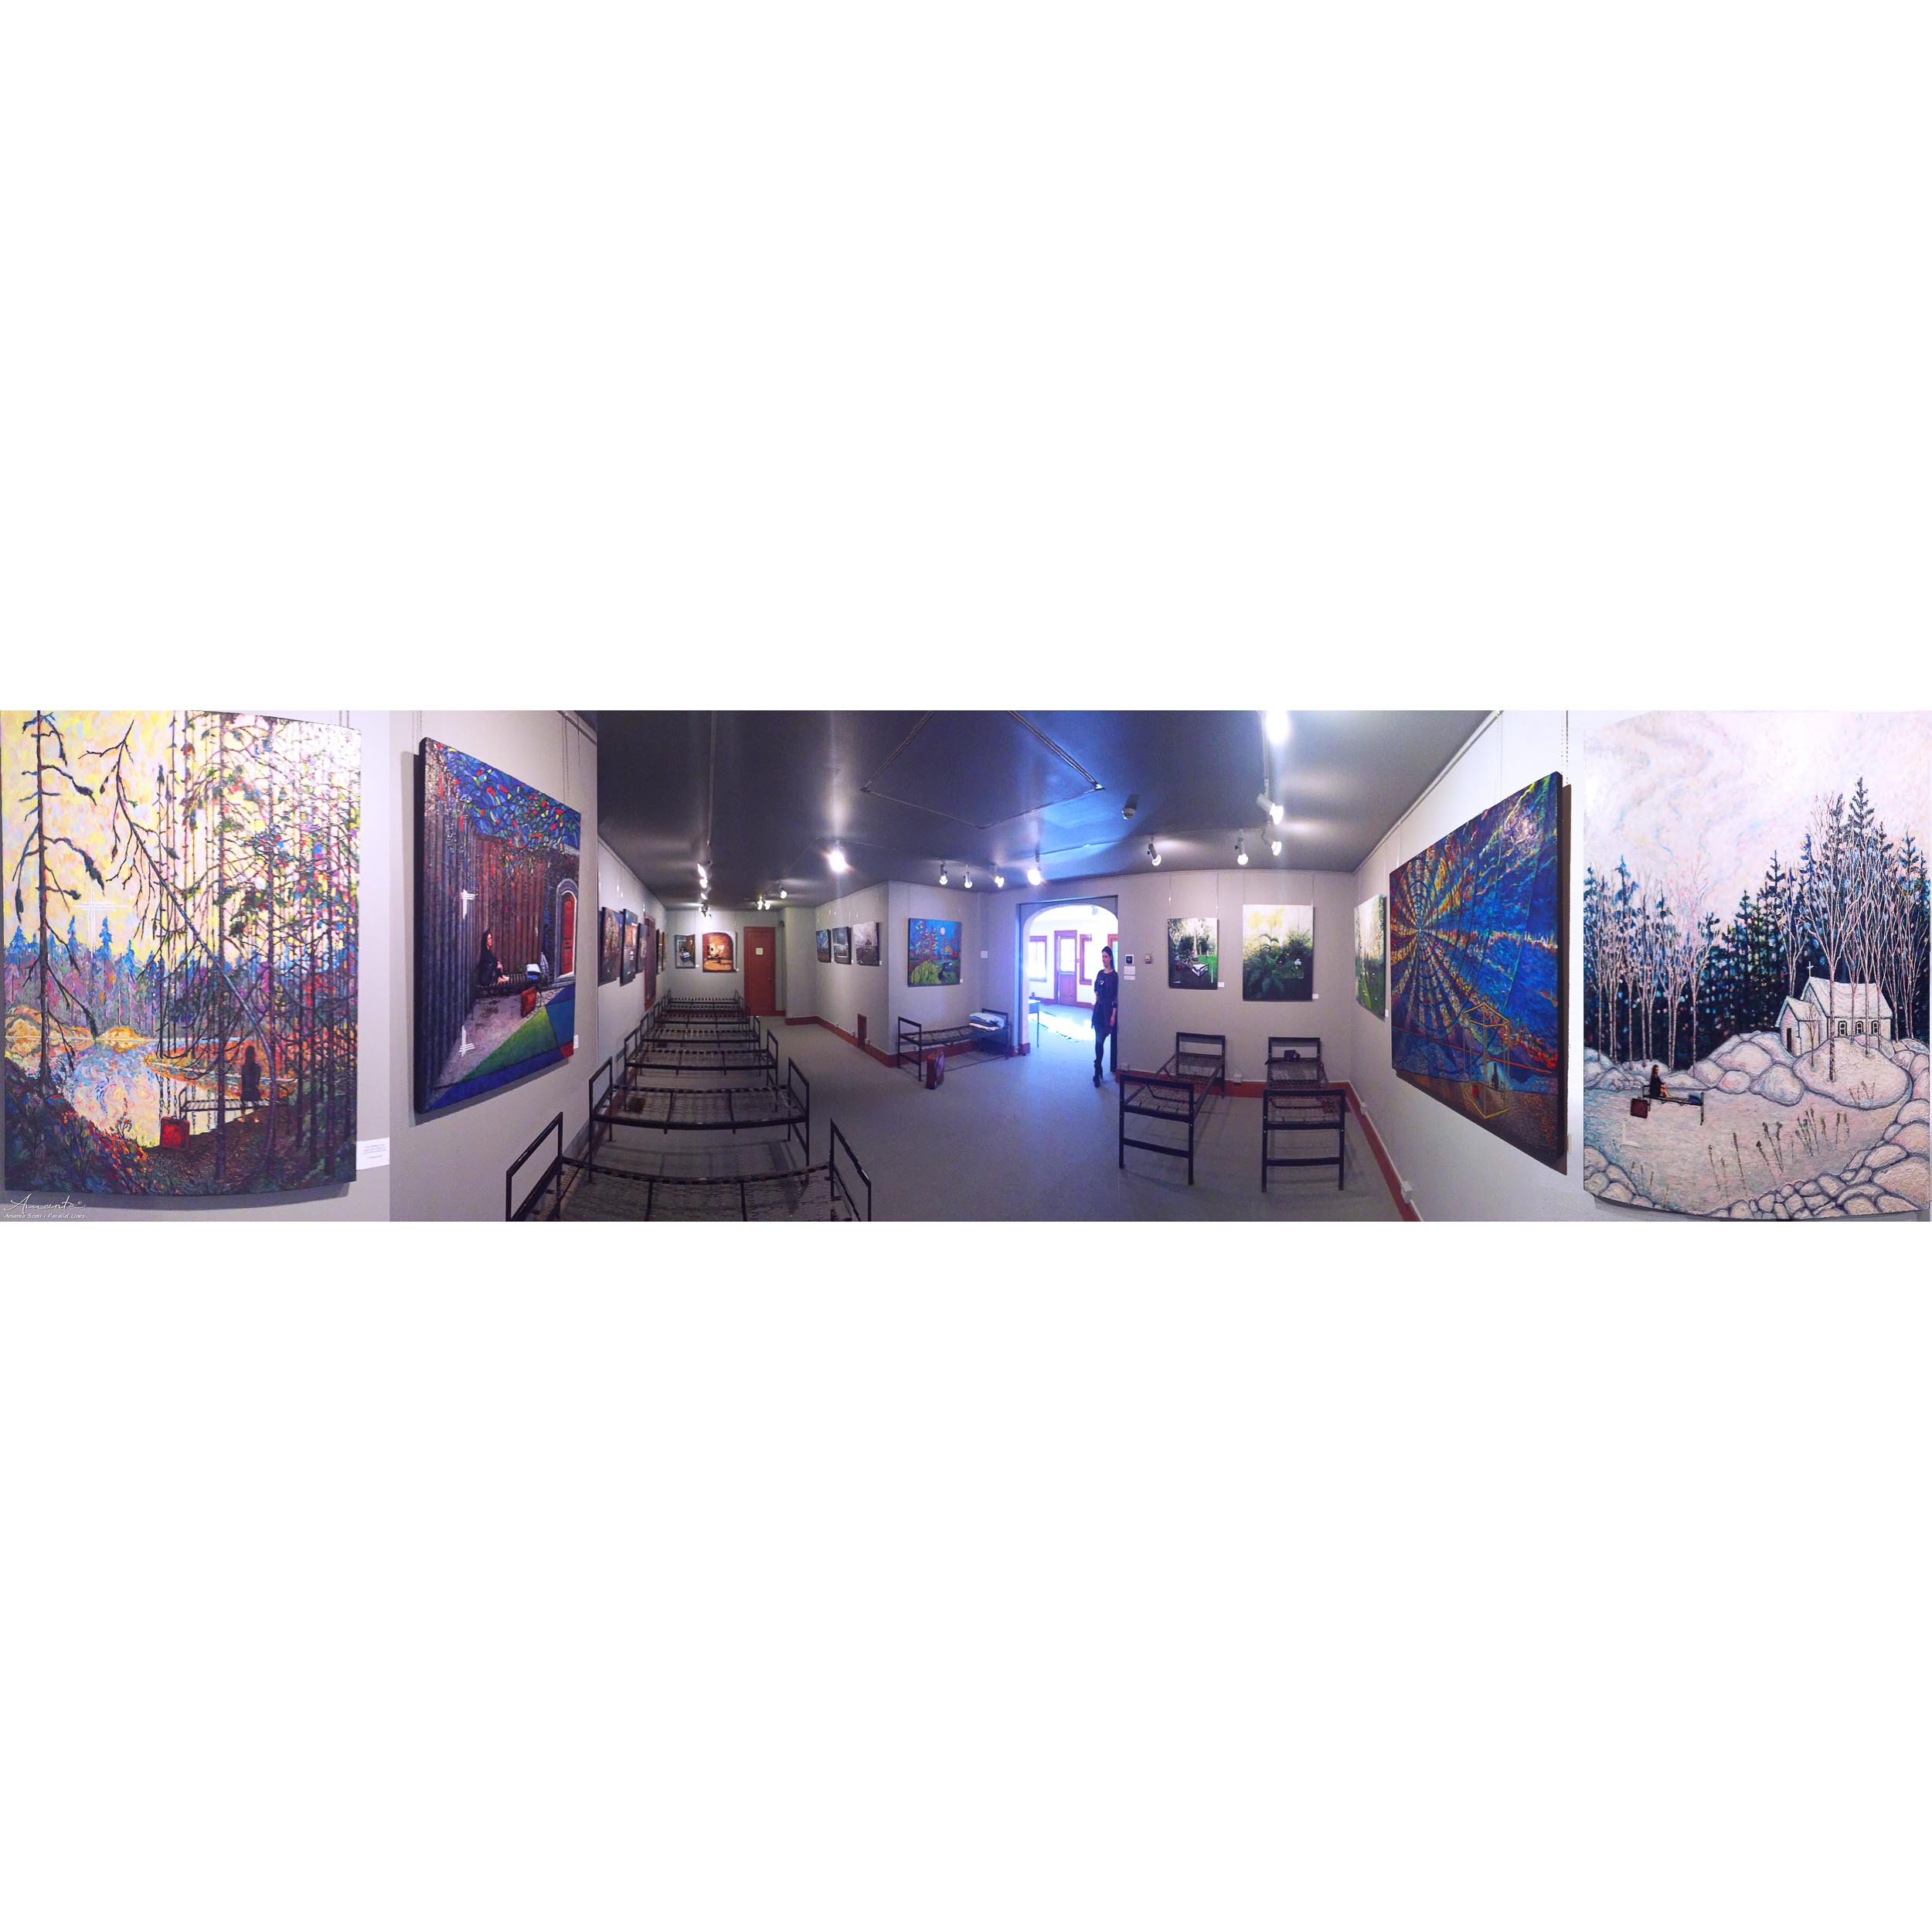 Parallel Lines exhibition panorama